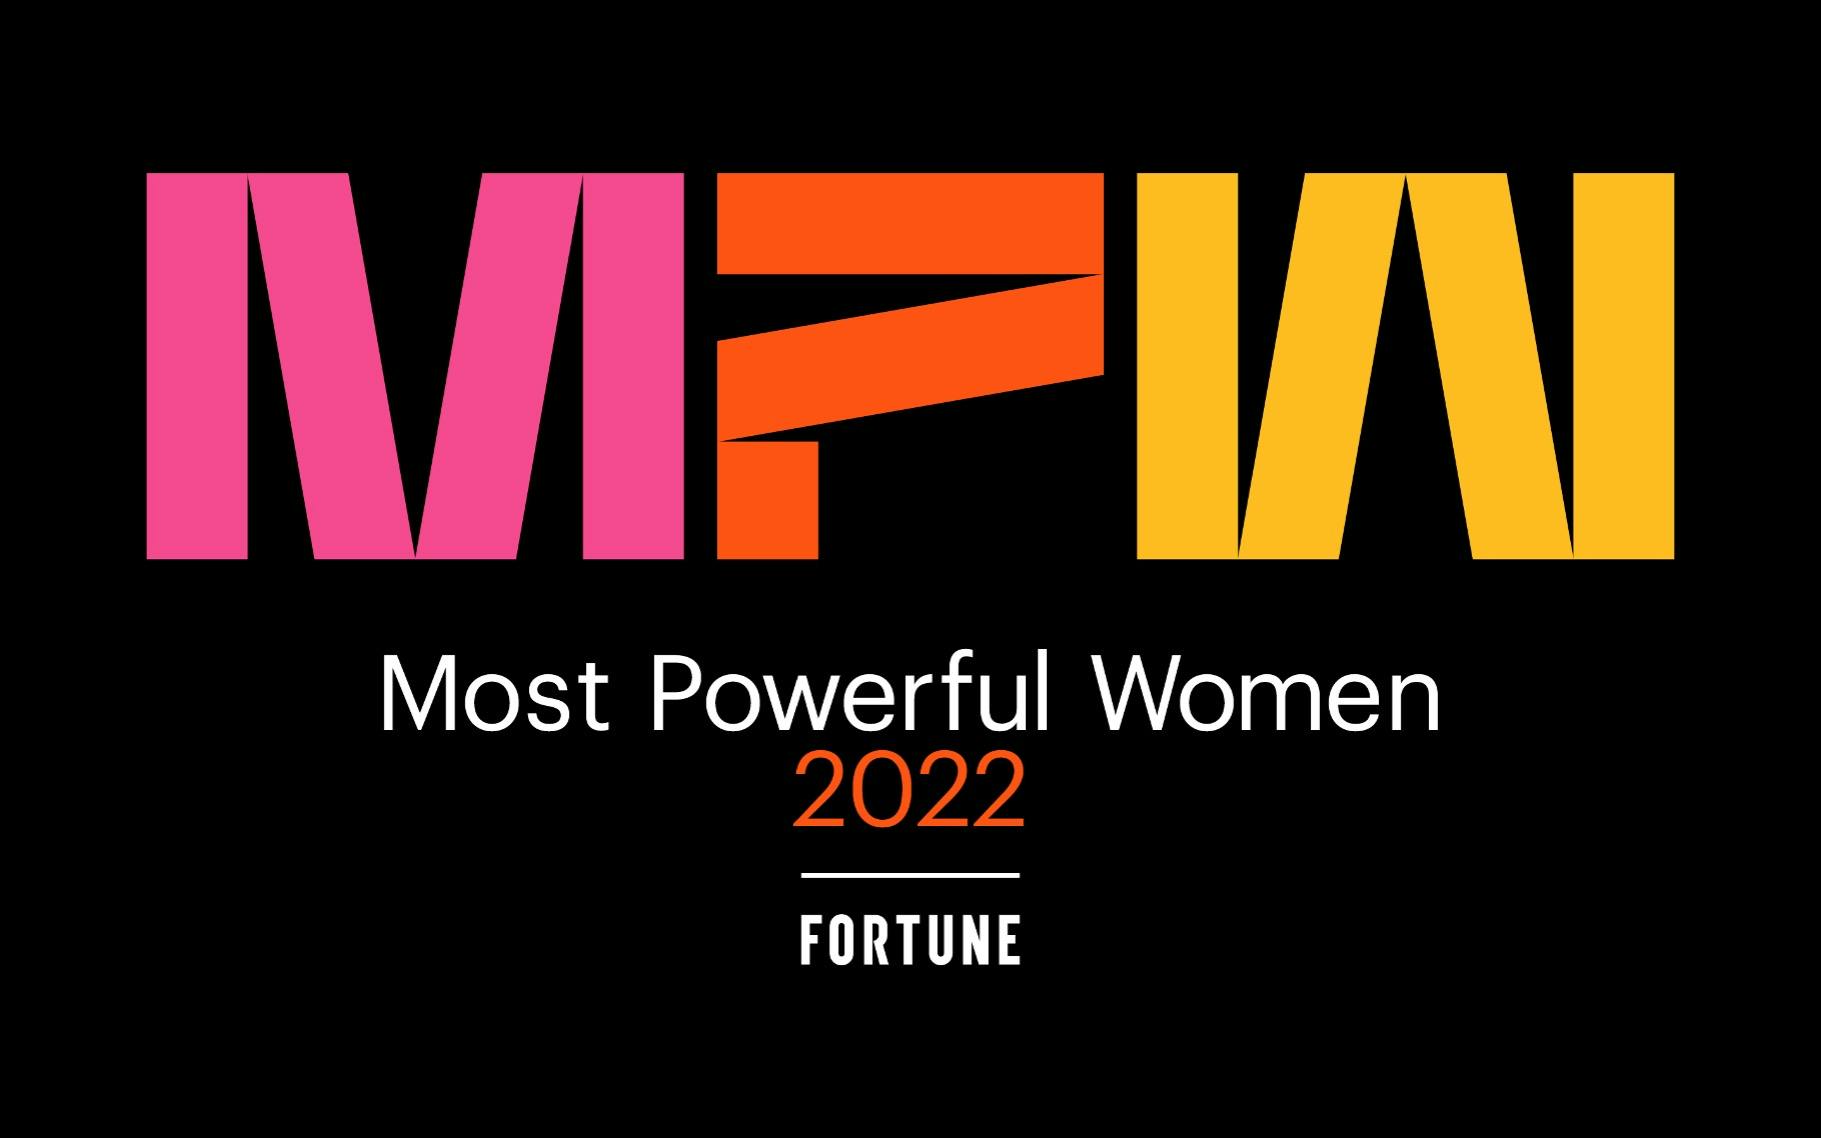 Fortune: MPW Most Powerful Women of 2022 logo